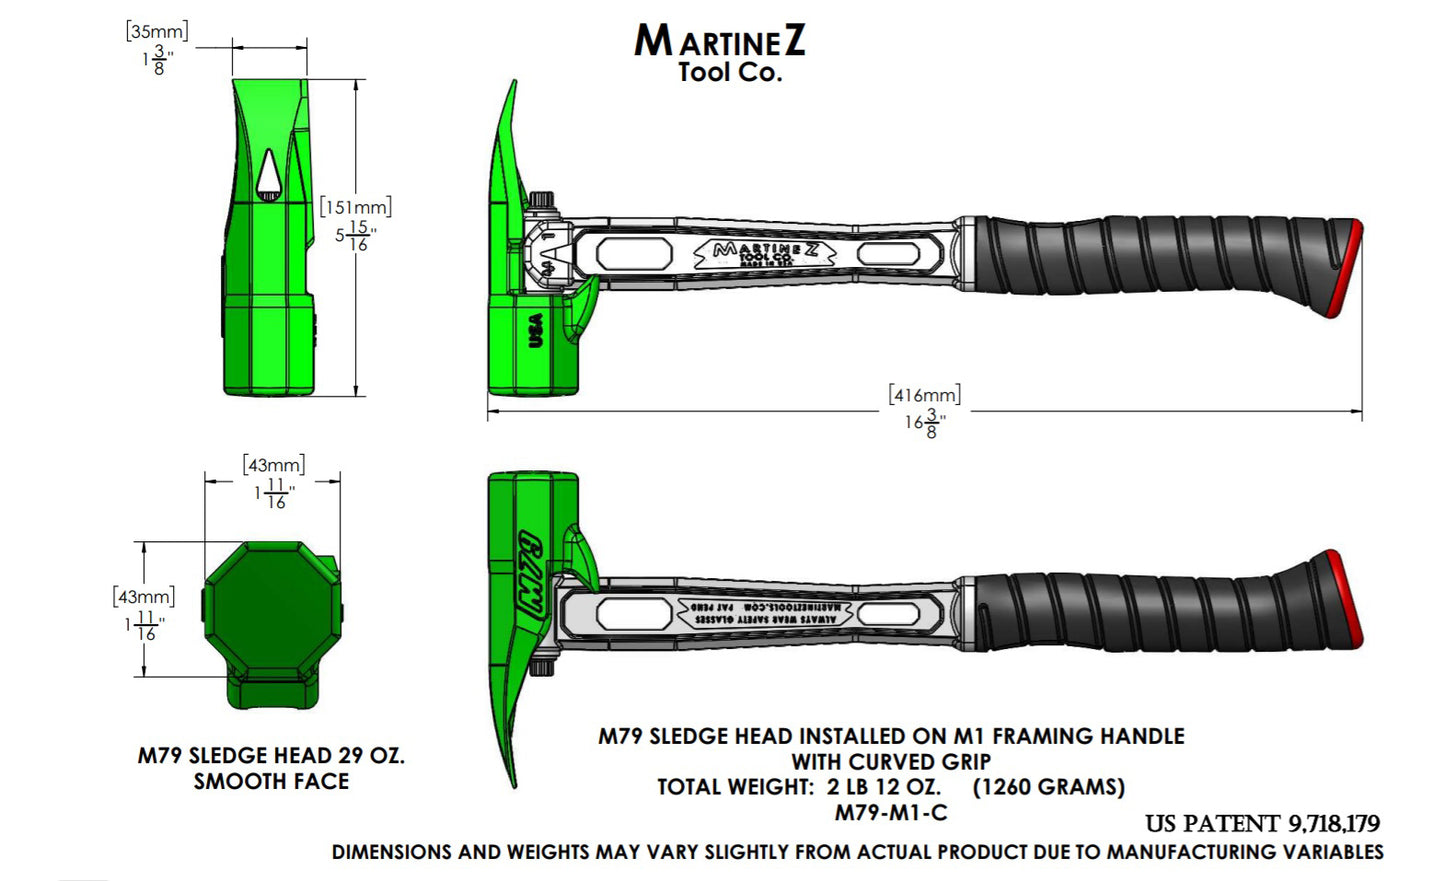 M79 SLEDGE HEAD INSTALLED ON M1 FRAMING HANDLE WITH GRIP